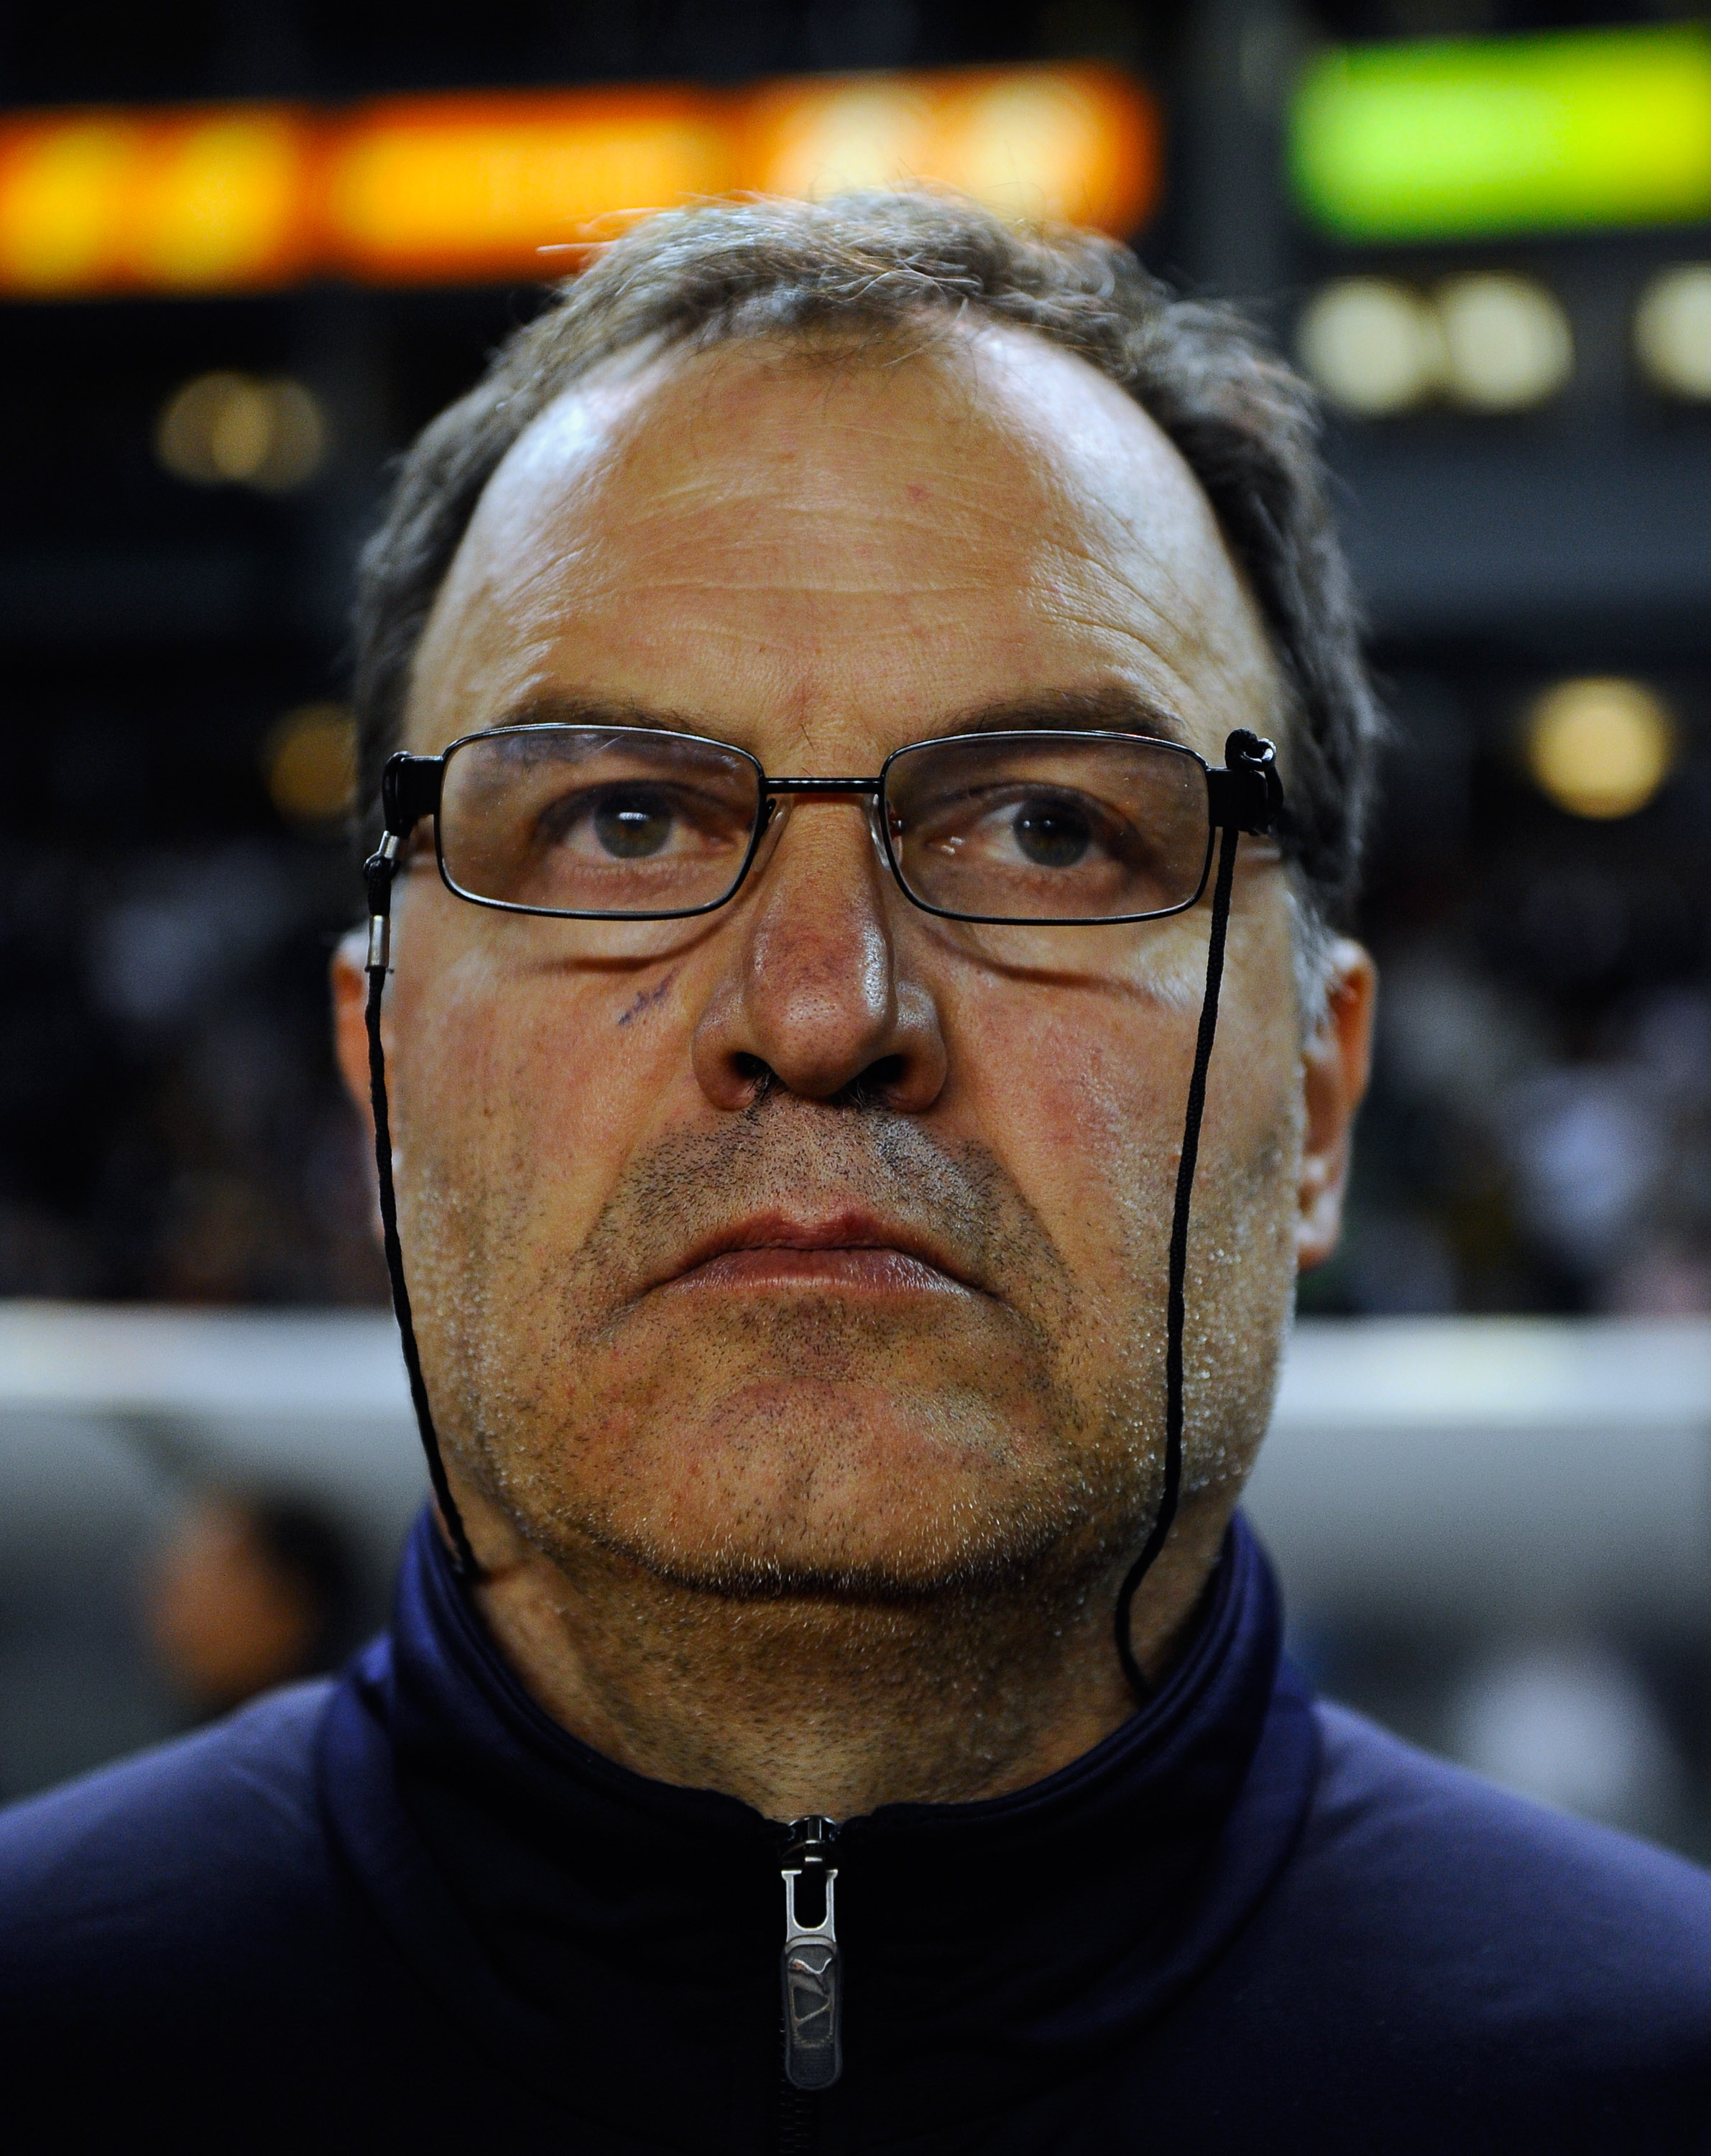 CARSON, CA - JANUARY 22: Marcelo Bielsa coach of Chile during the friendly soccer match against United States at The Home Depot Center on January 22, 2011 in Carson, California.  (Photo by Kevork Djansezian/Getty Images)